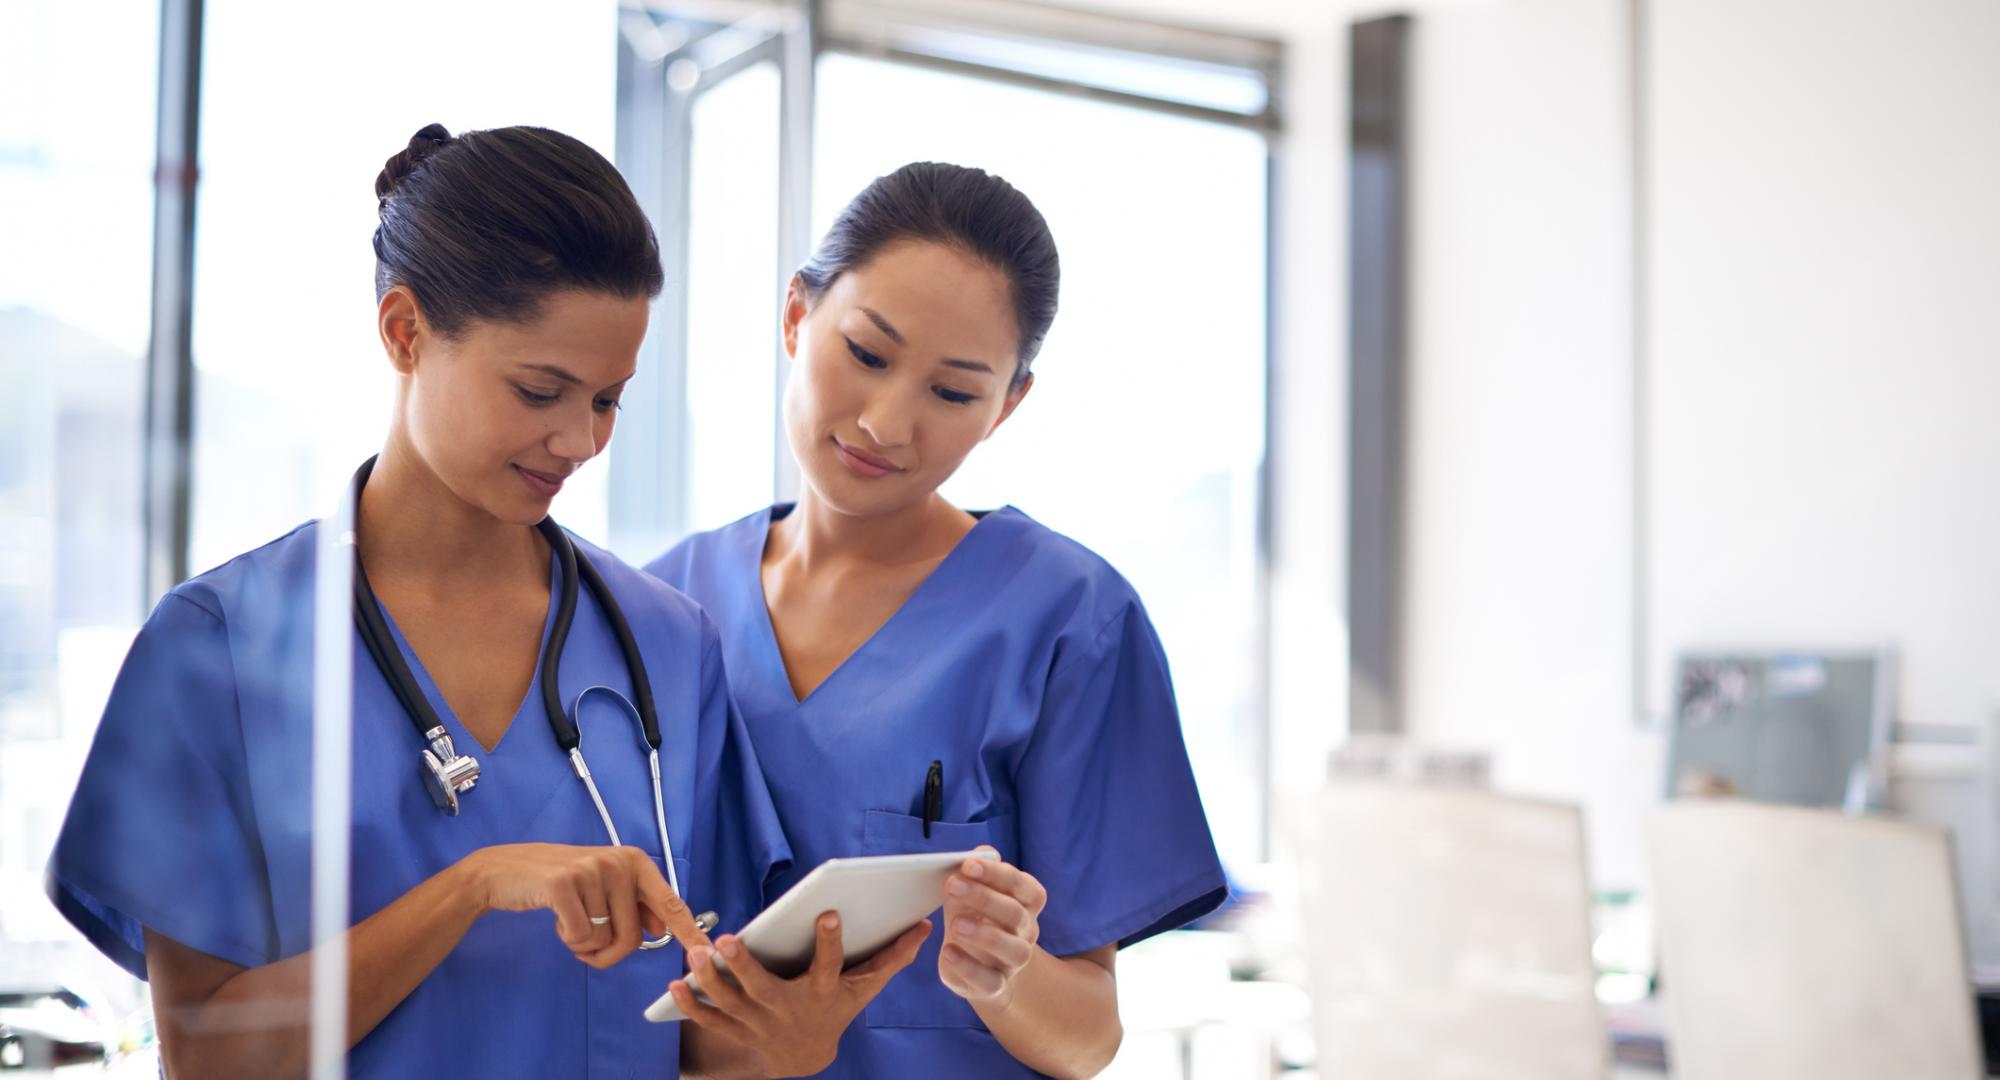 Two nurses discuss while reading a tablet computer